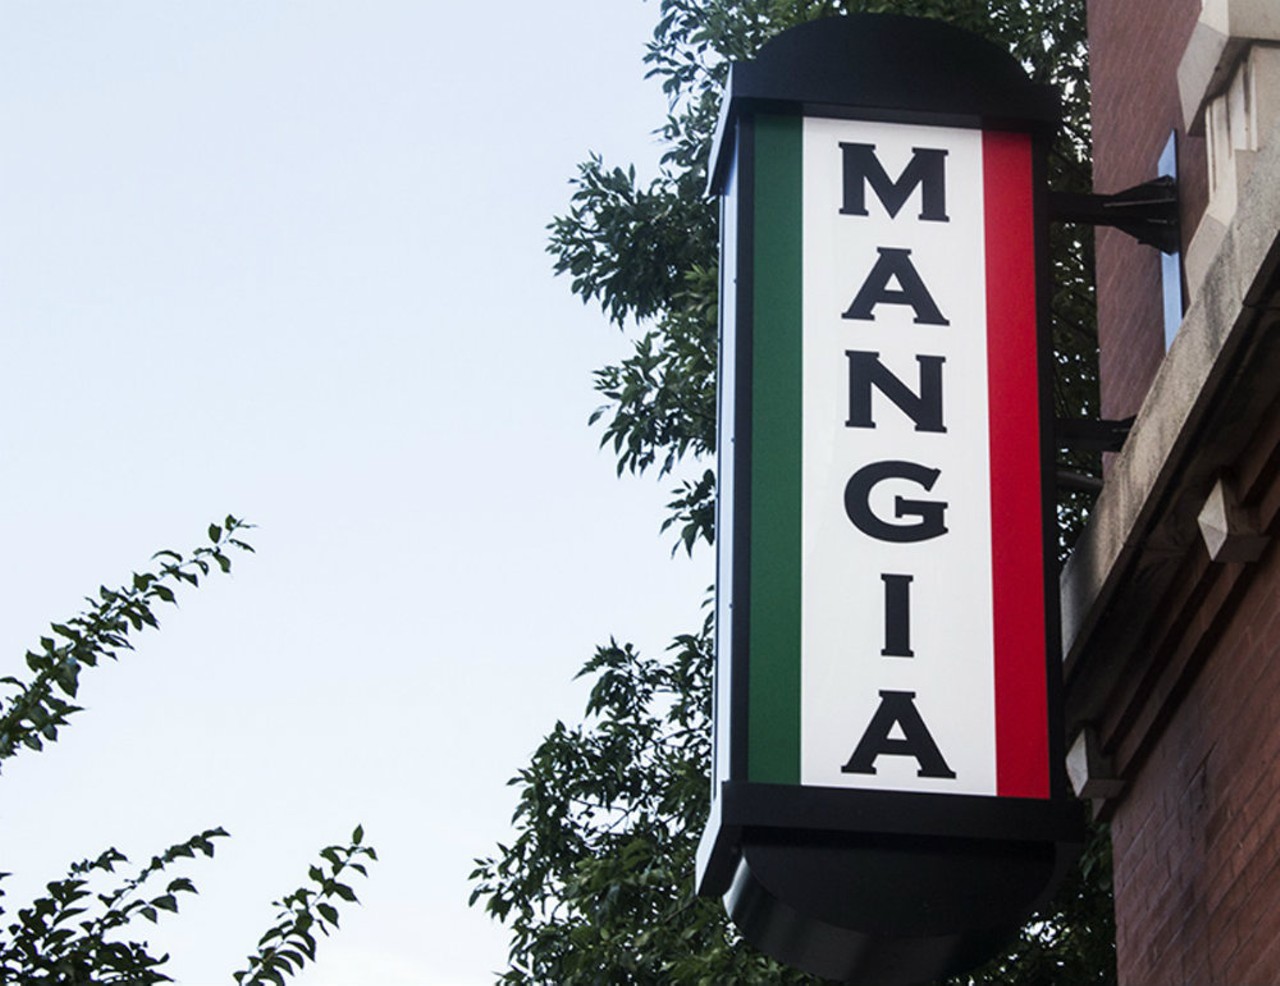 Mangia Italiano
3145 S. Grand Blvd.
St. Louis, MO 63118
Mangia Italiano is a go-to spot for late nighters, thanks to its 3 a.m. closing time, live music and game room. Hungry? More than 40 menu items are served until 1:30 a.m., and you can get the sandwiches and housemade chips until 3 a.m. RFT photo.